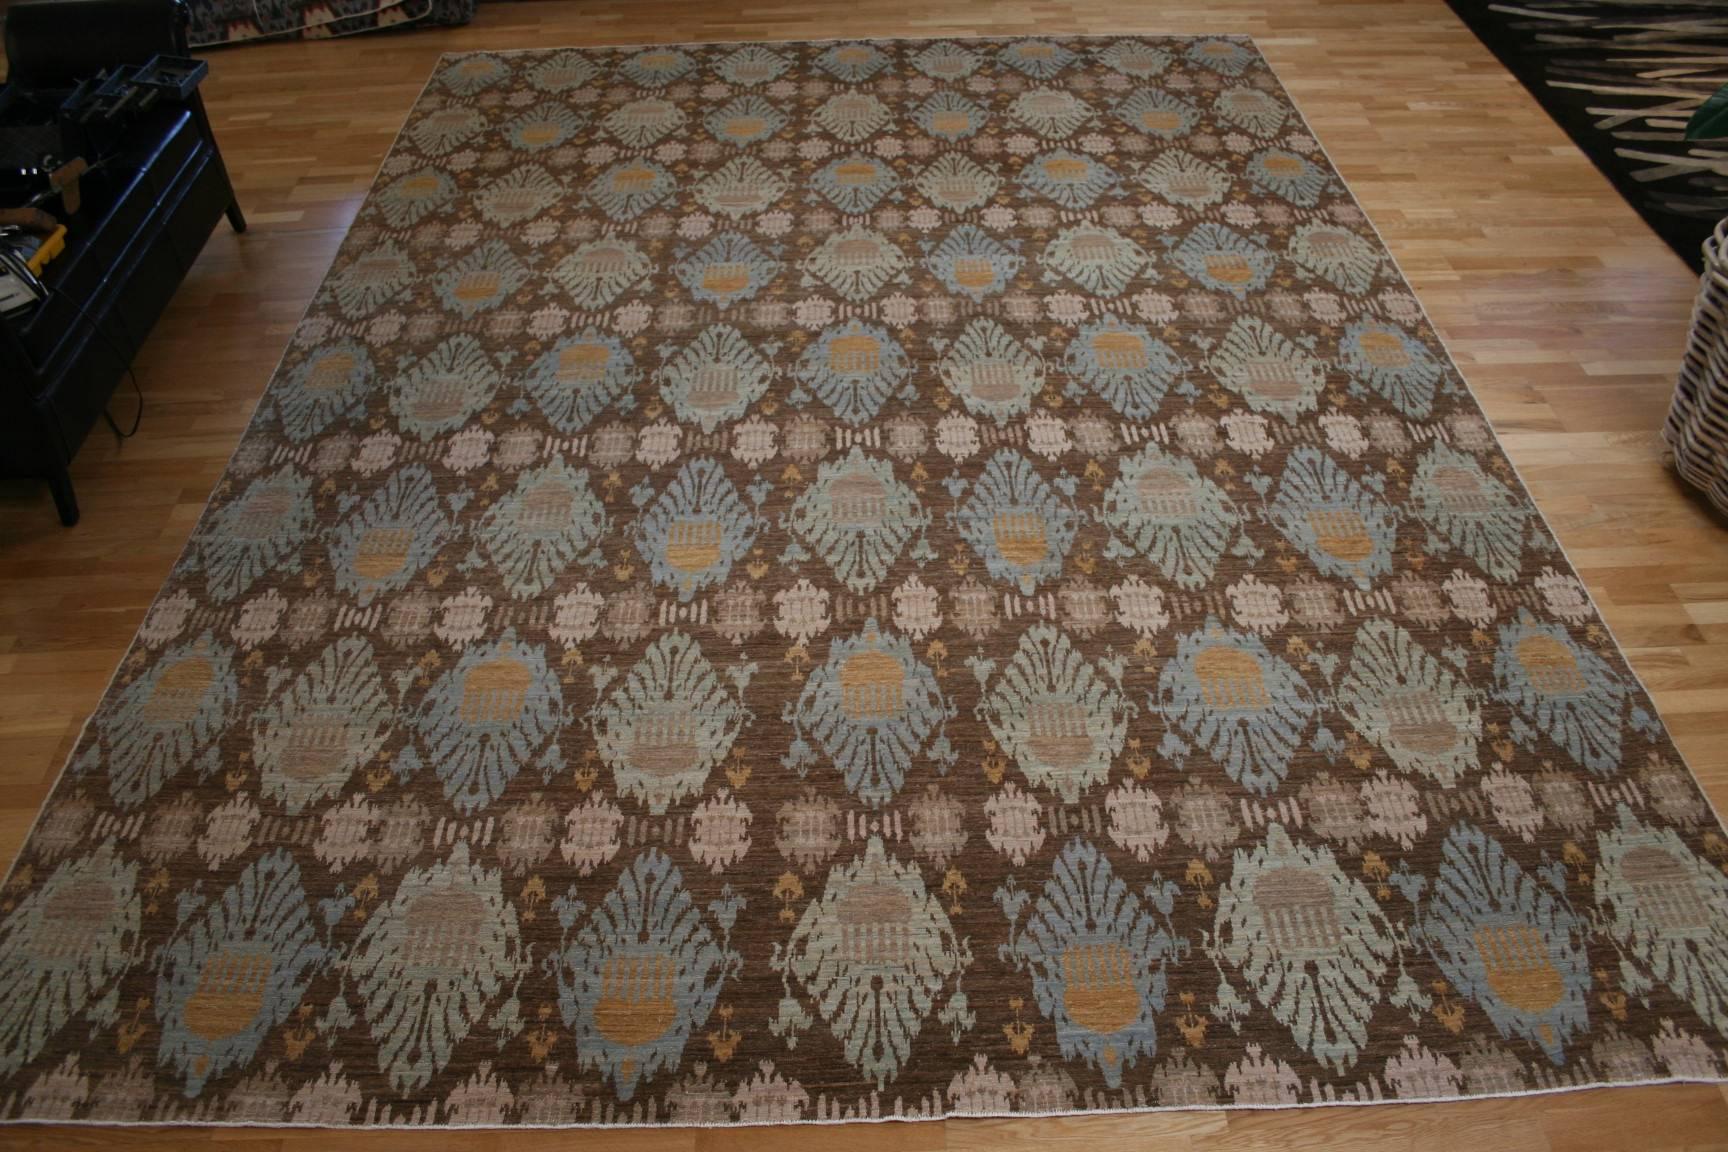 Woven in the Northern regions of Afghanistan, of the finest quality, high mountain wool, this rug is one of the most decorative examples of Afghan weavings produced today. The design is an adaptation of the famous Ikat fabrics and textiles from